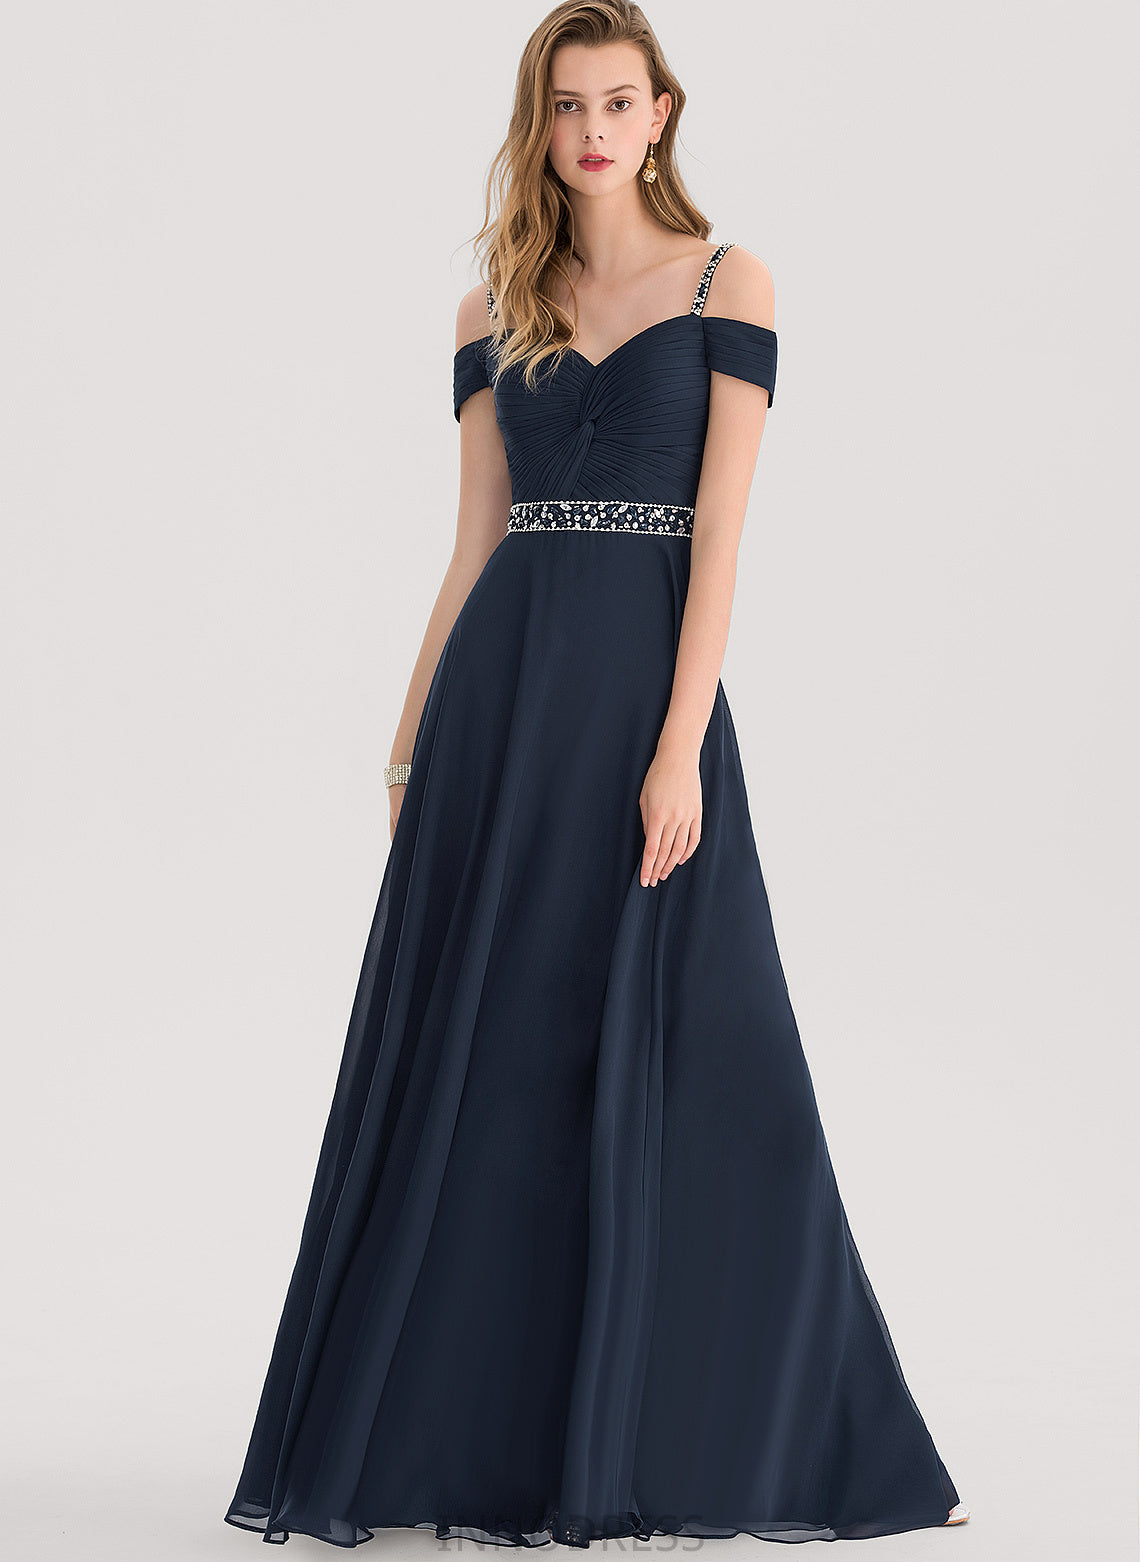 Cold A-Line Pleated Shoulder Sequins Chiffon Floor-Length Kylee V-neck Prom Dresses With Beading